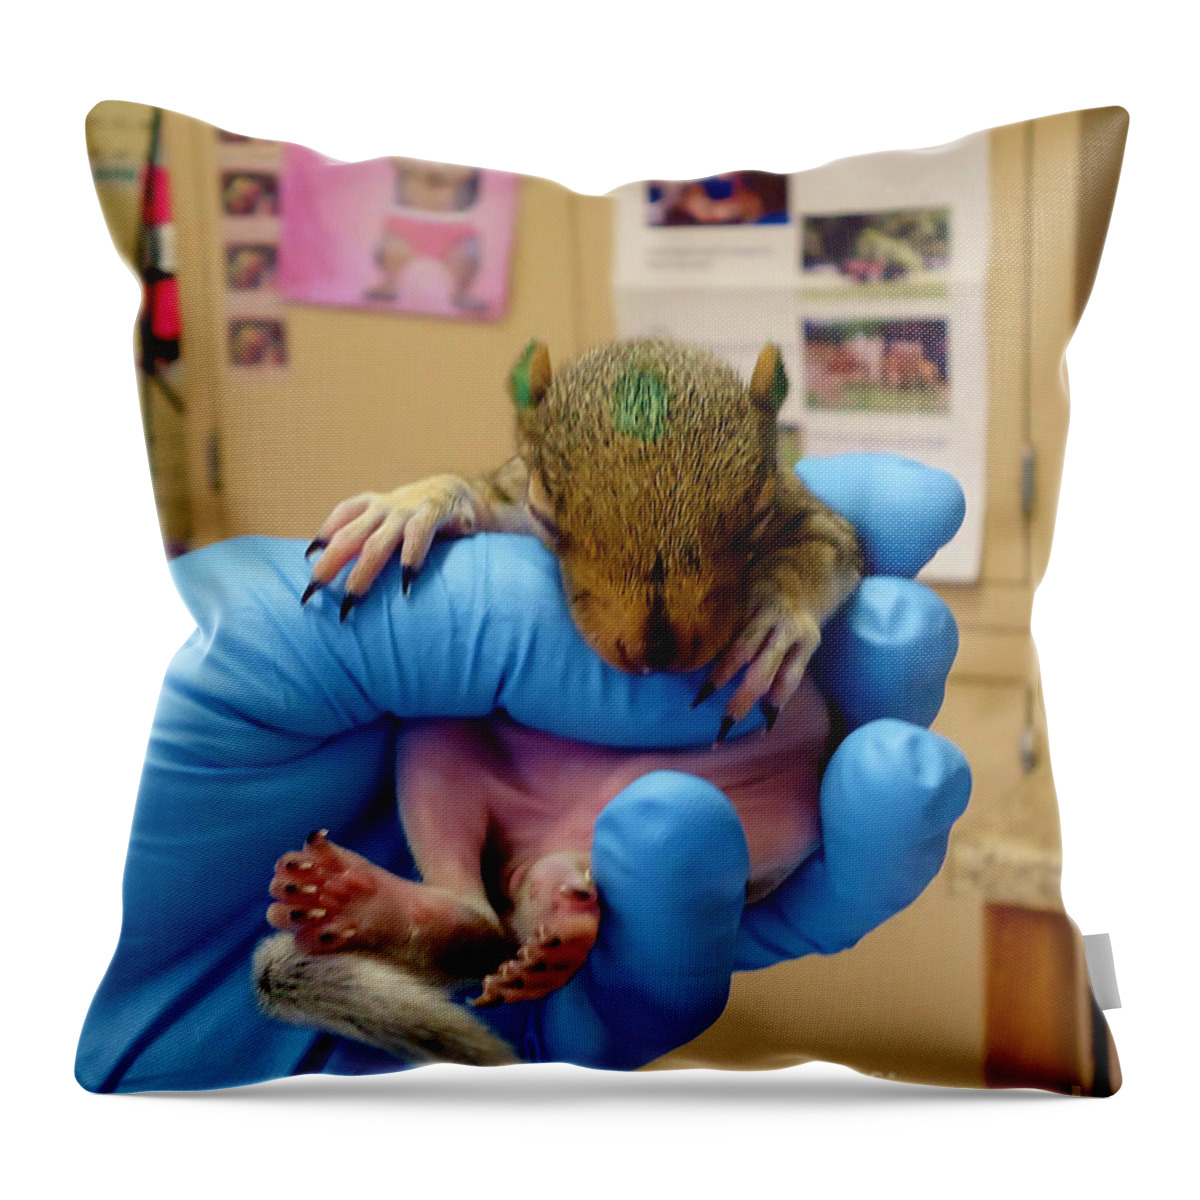 Baby Throw Pillow featuring the photograph Wee One by Art Dingo